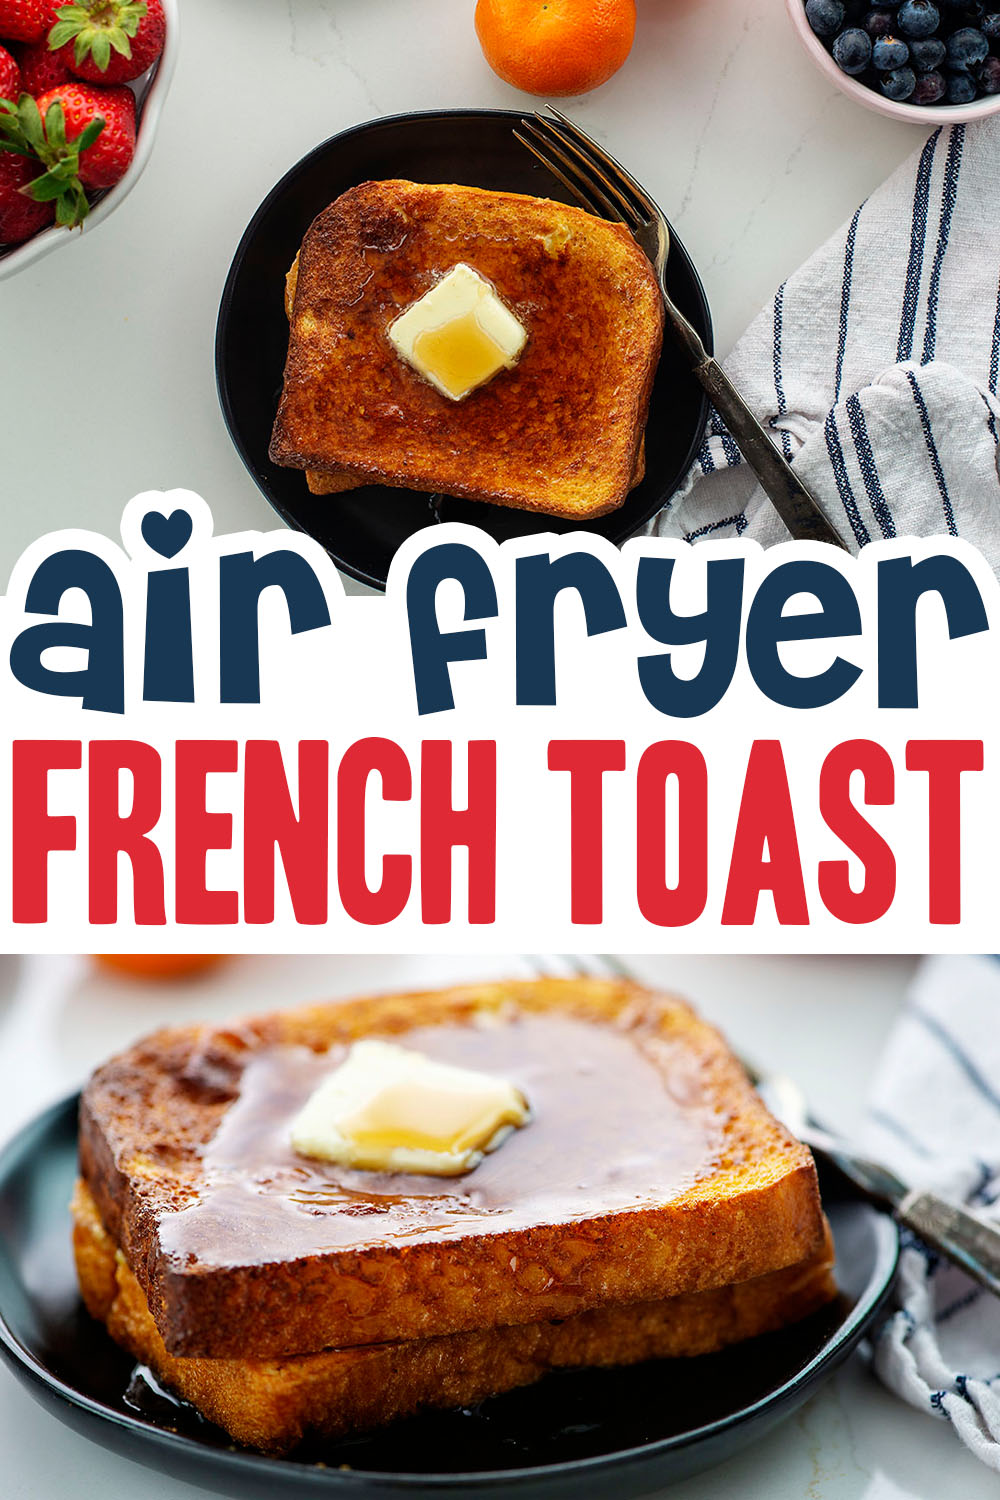 We are loving this French toast recipe using the air fryer to get a great texture and get it evenly cooked!